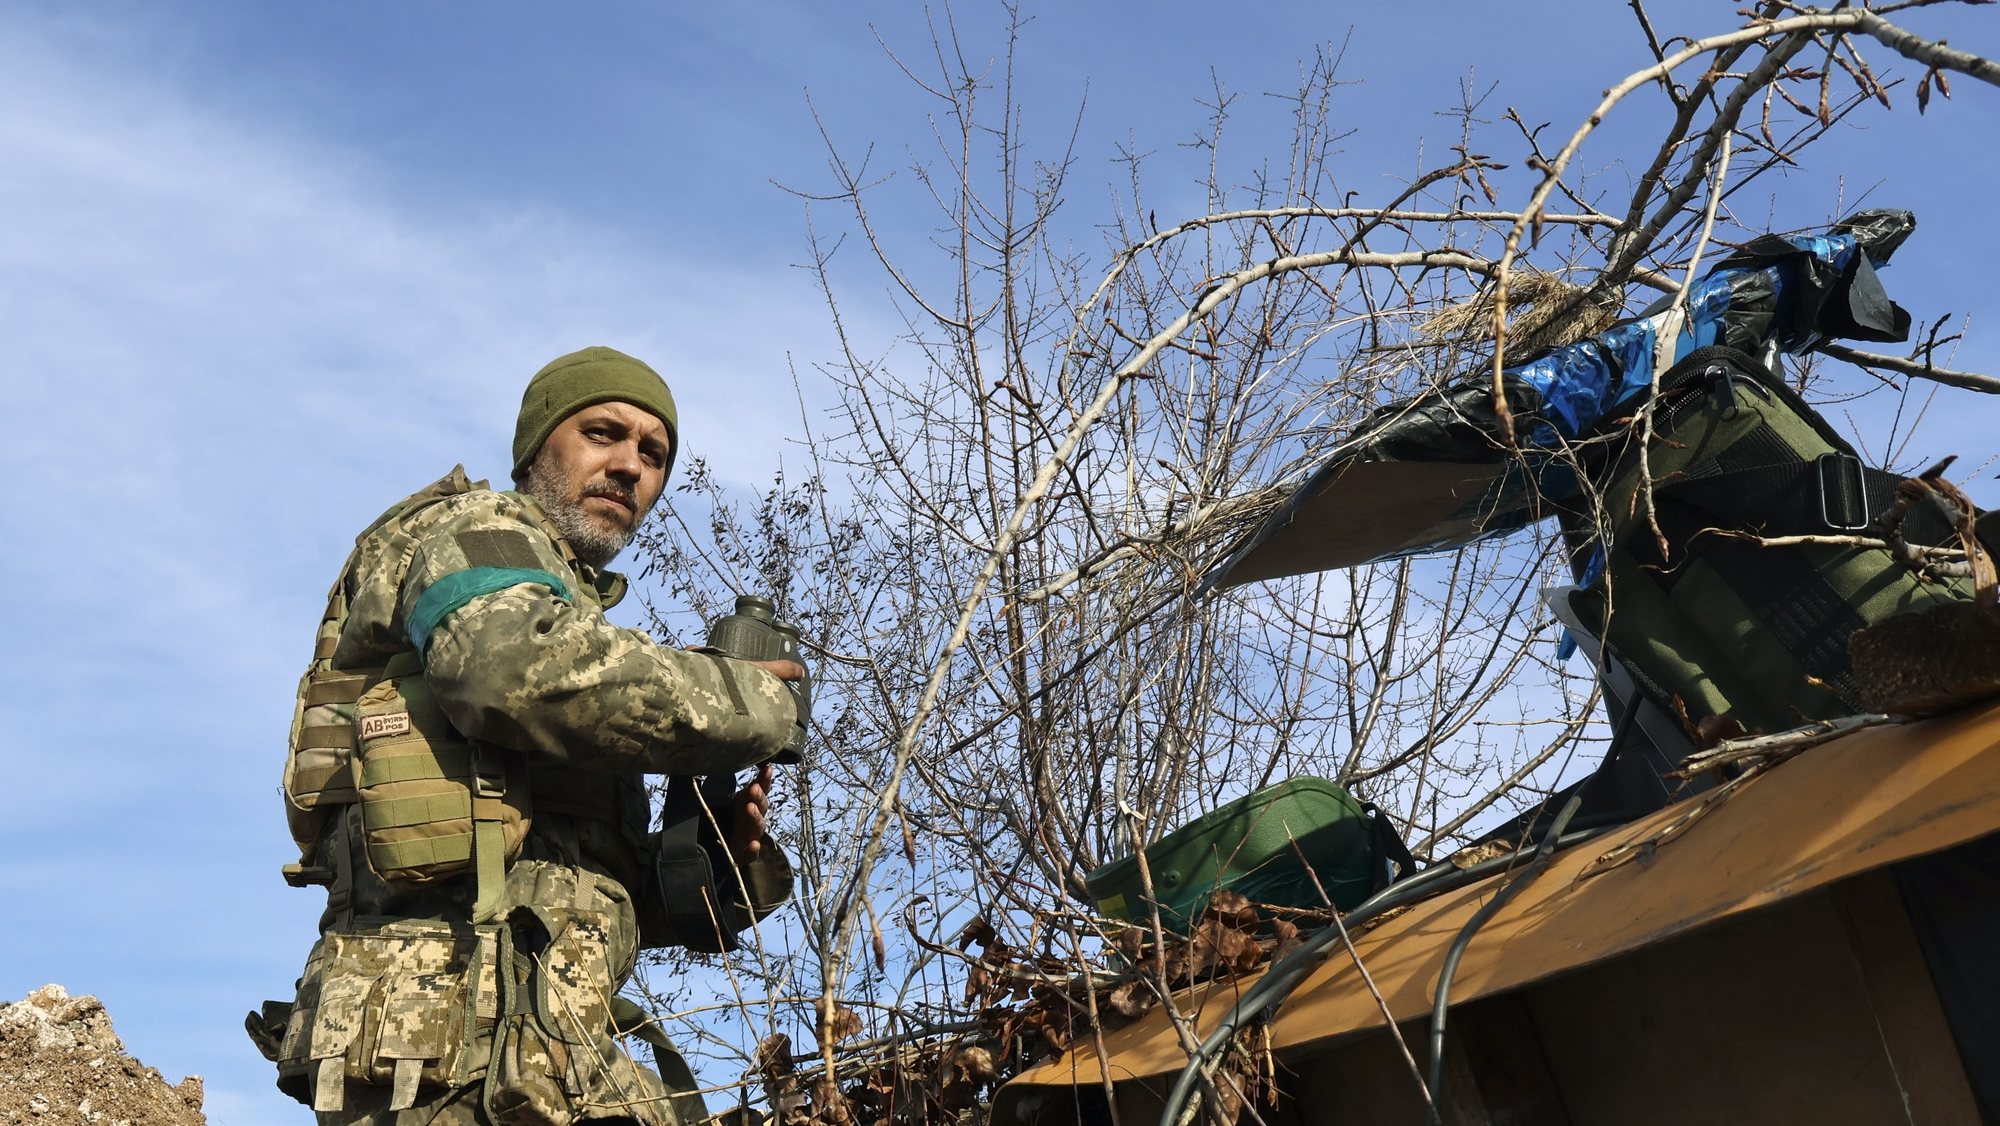 epa10543348 A Ukrainian soldier from an anti-aircraft unit seen in position, at an undisclosed location near the frontline city of Bakhmut, eastern Ukraine, 25 March 2023 The frontline city of Bakhmut, a key target for Russian forces, has seen heavy fighting for months. Russian troops on 24 February 2022, entered Ukrainian territory, starting a conflict that provoked destruction and a humanitarian crisis.  EPA/ROMAN CHOP